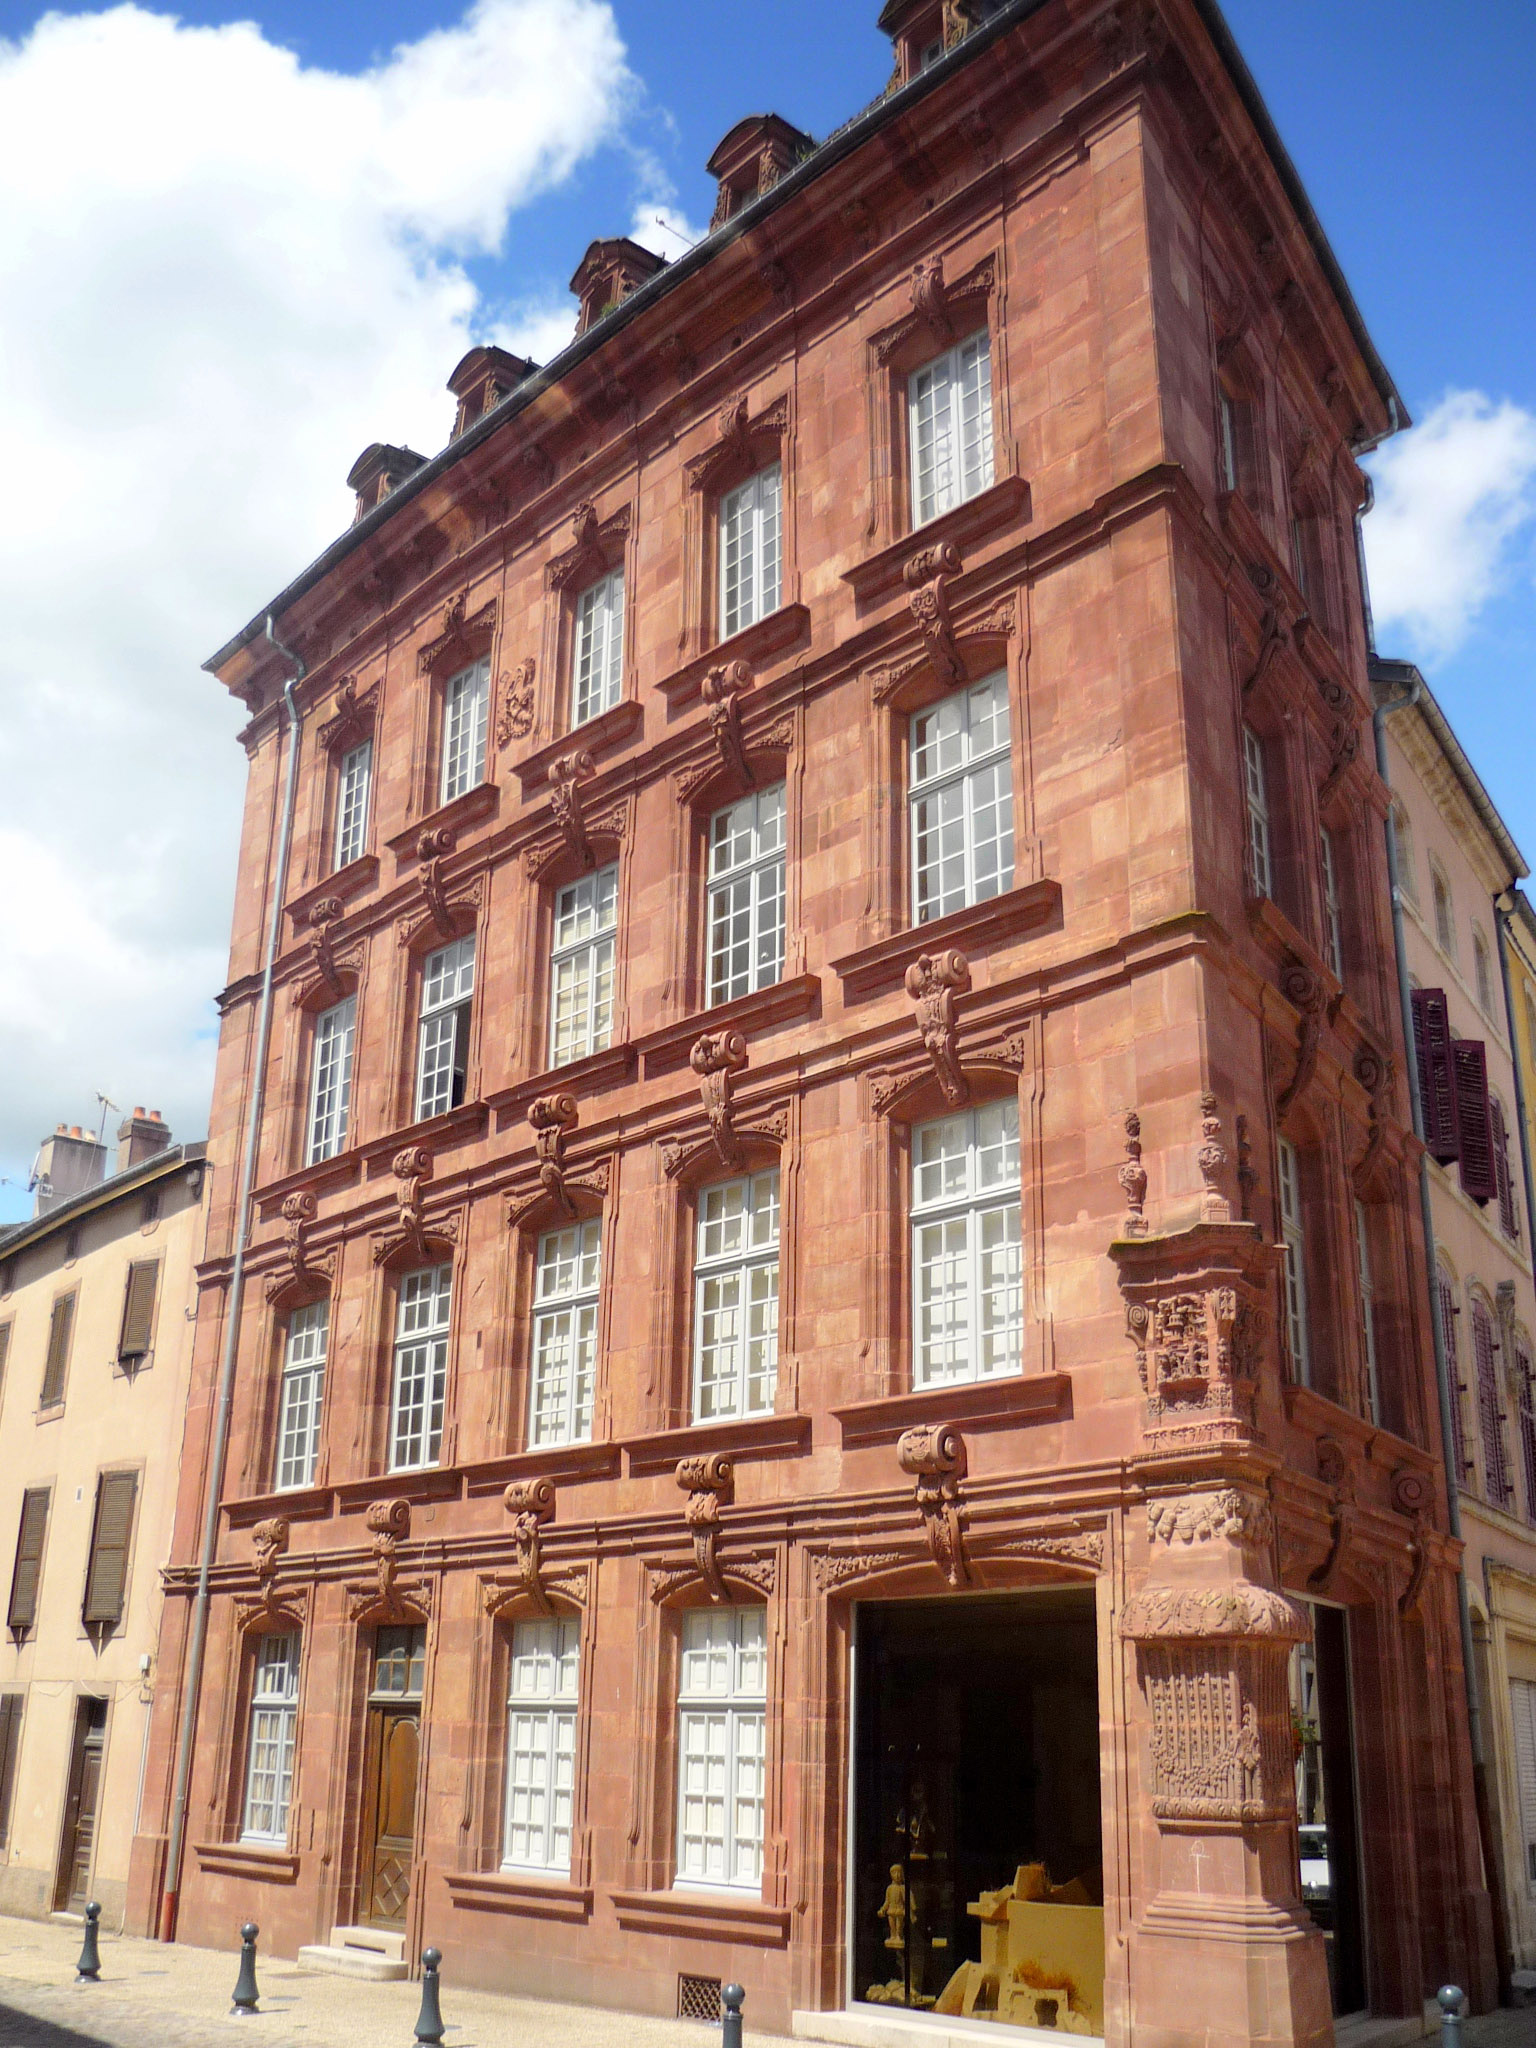 The Vosges sandstone façade of the merchants' house in Lunéville © French Moments